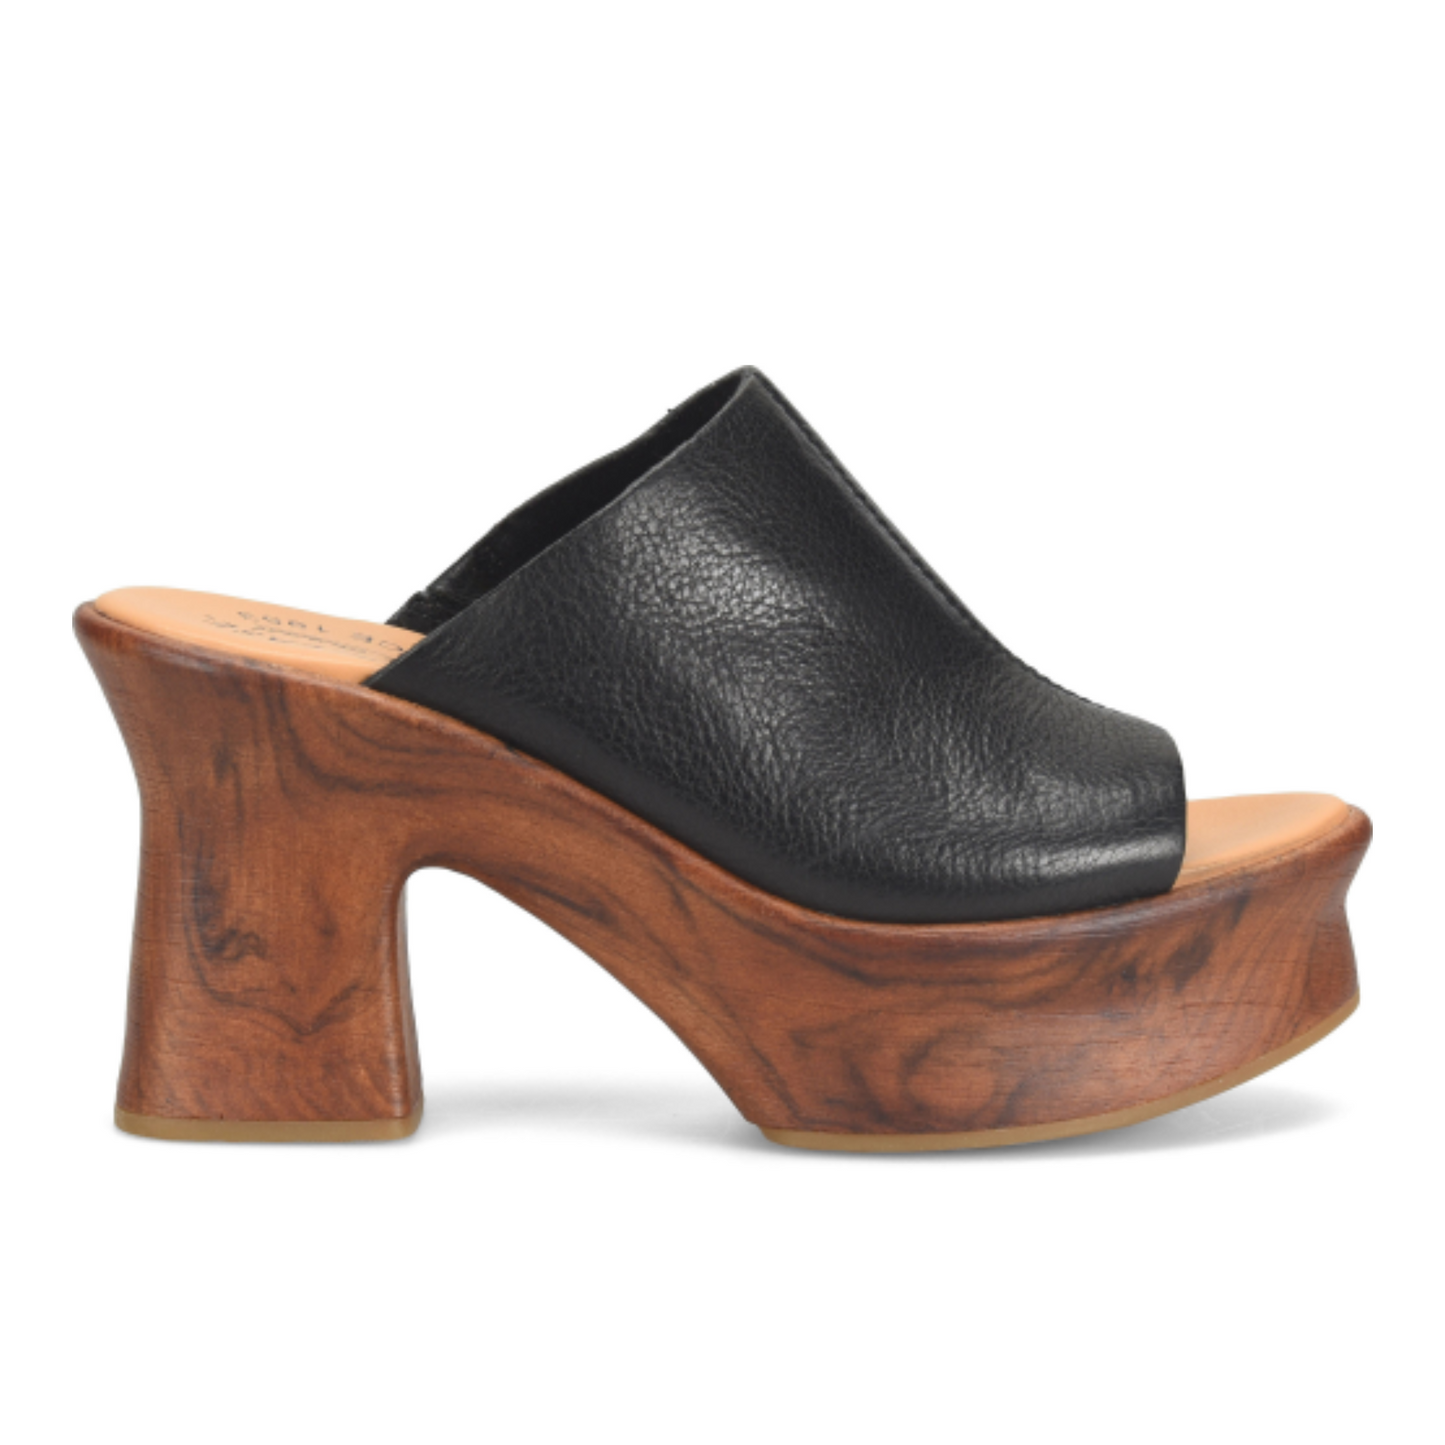 Side view of the Kork-Ease Cassia Clog in Black Leather